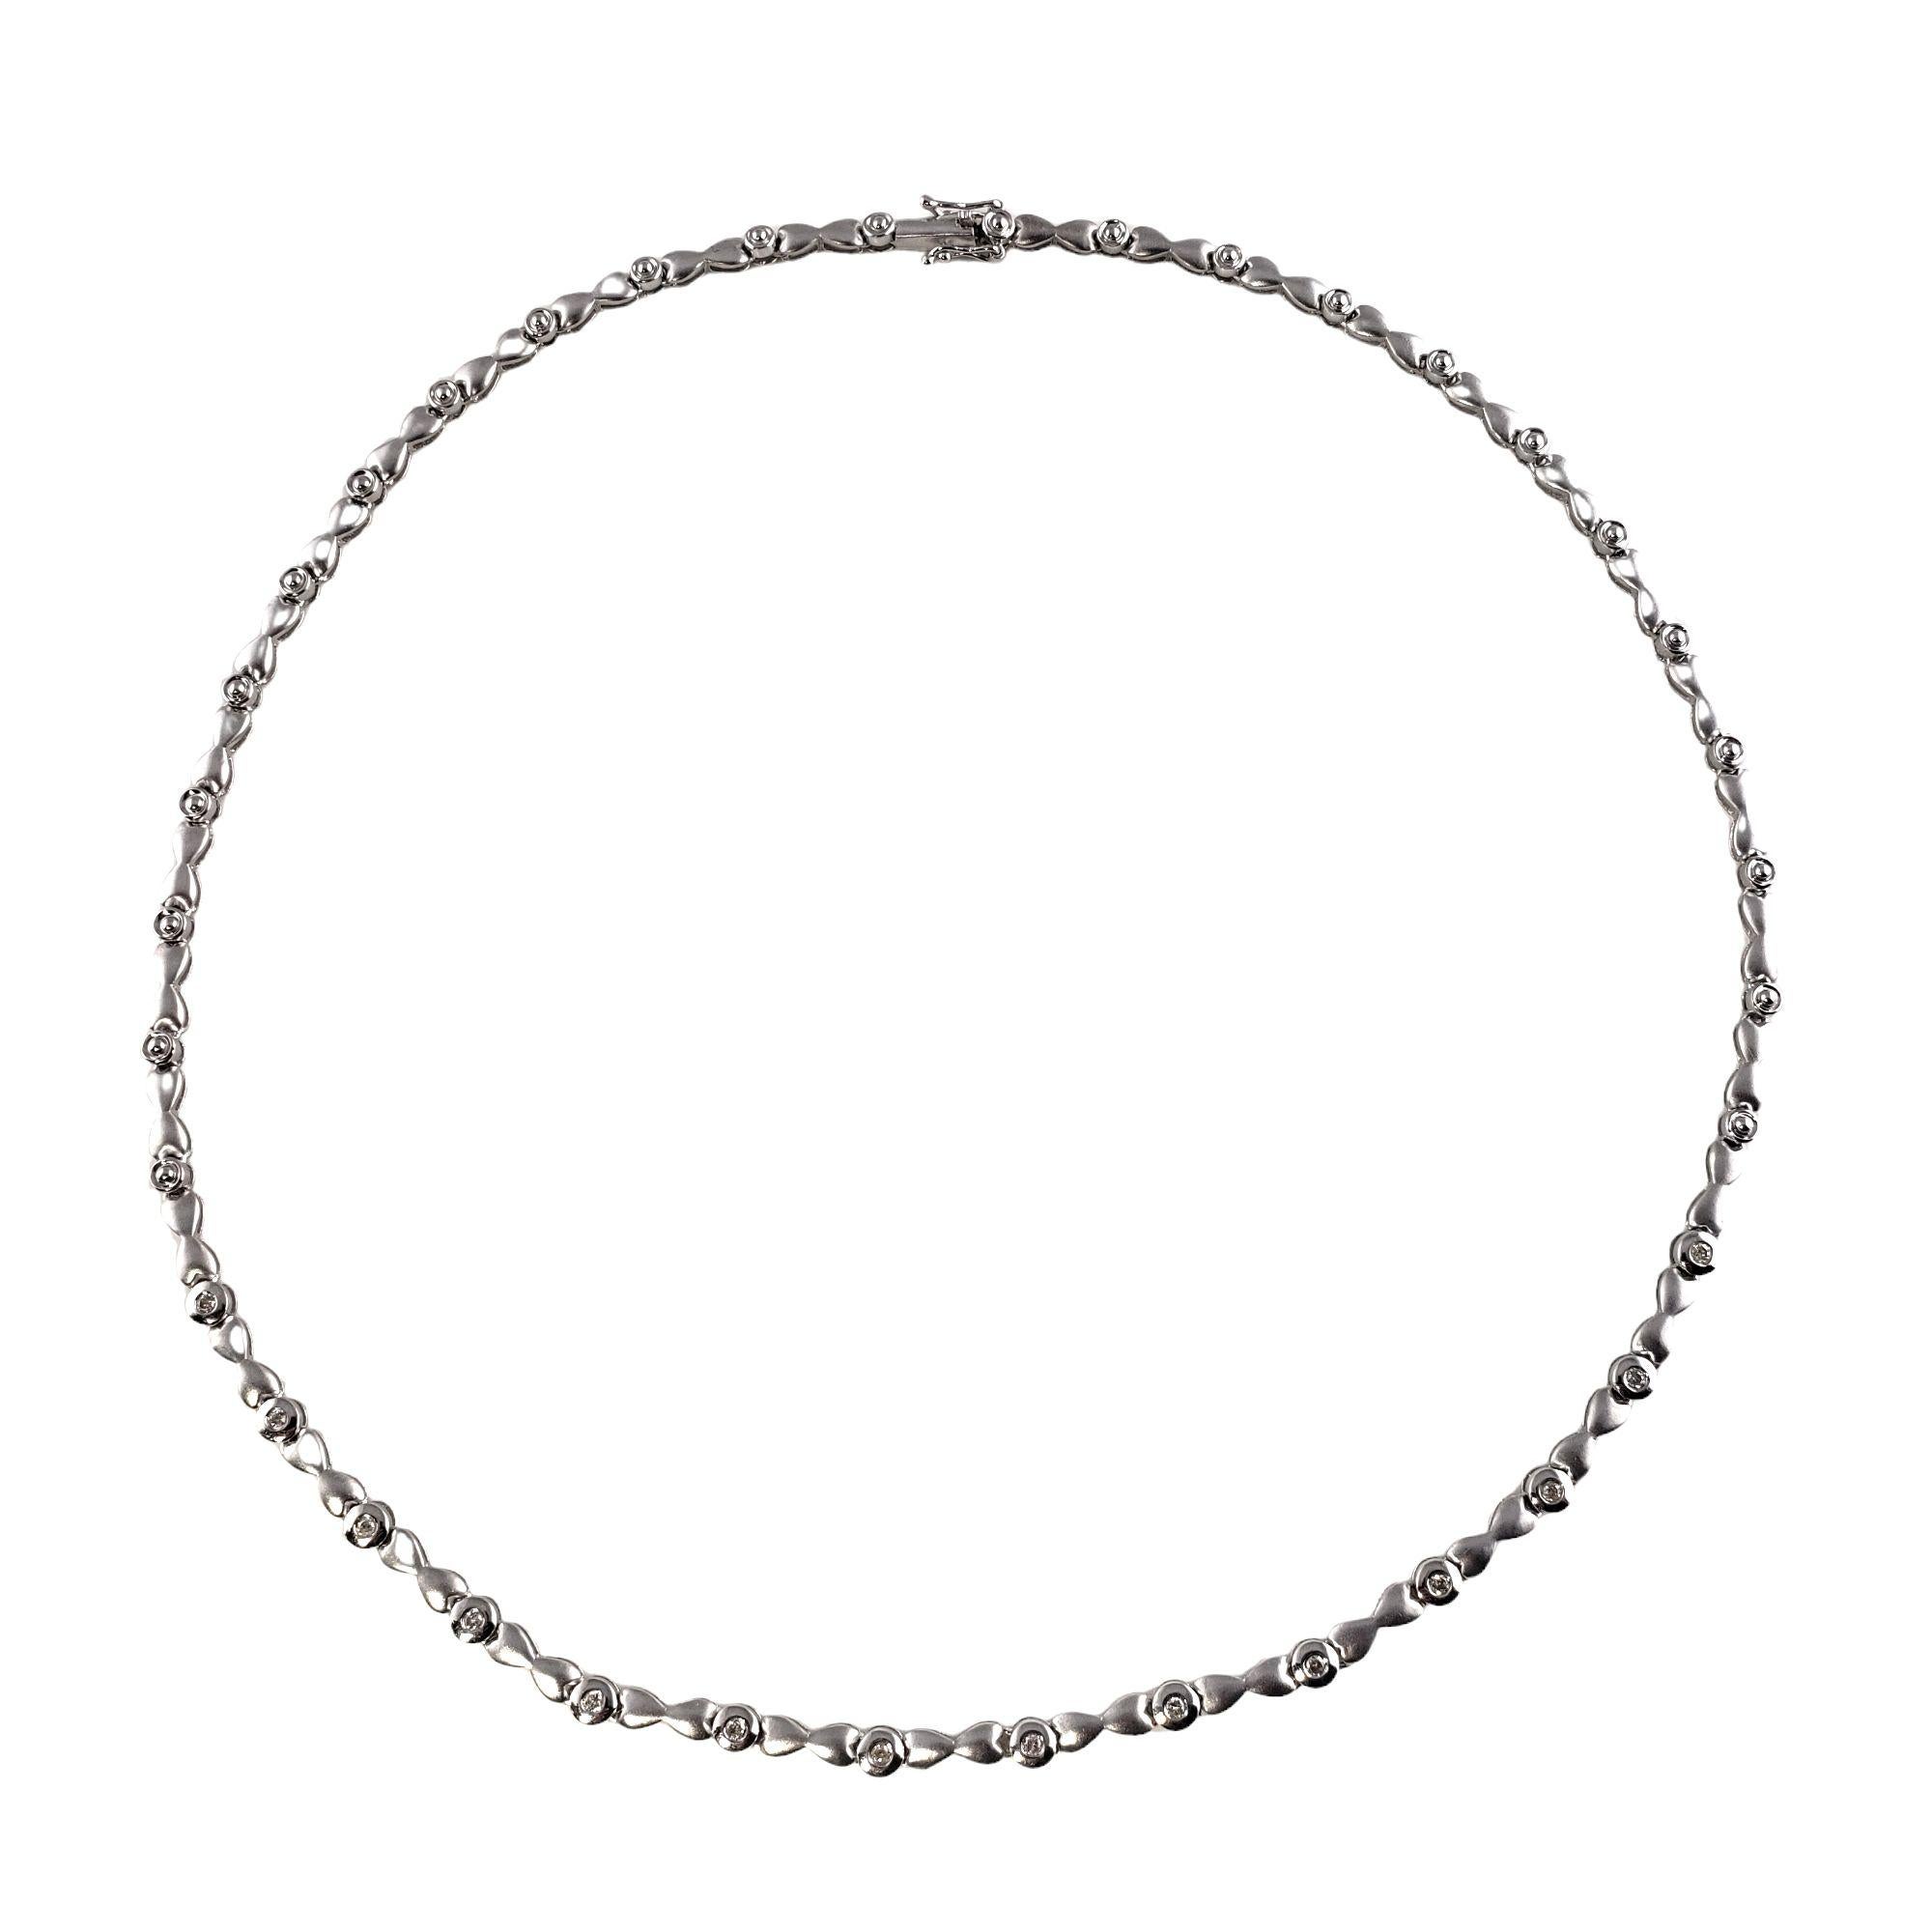 Vintage 14 Karat White Gold Diamond Station Necklace-

This sparkling station necklace features 14 round brilliant cut diamond set in beautifully detailed 14K white gold. Width: 4 mm.

Approximate total diamond weight: .28 ct.

Diamond color: